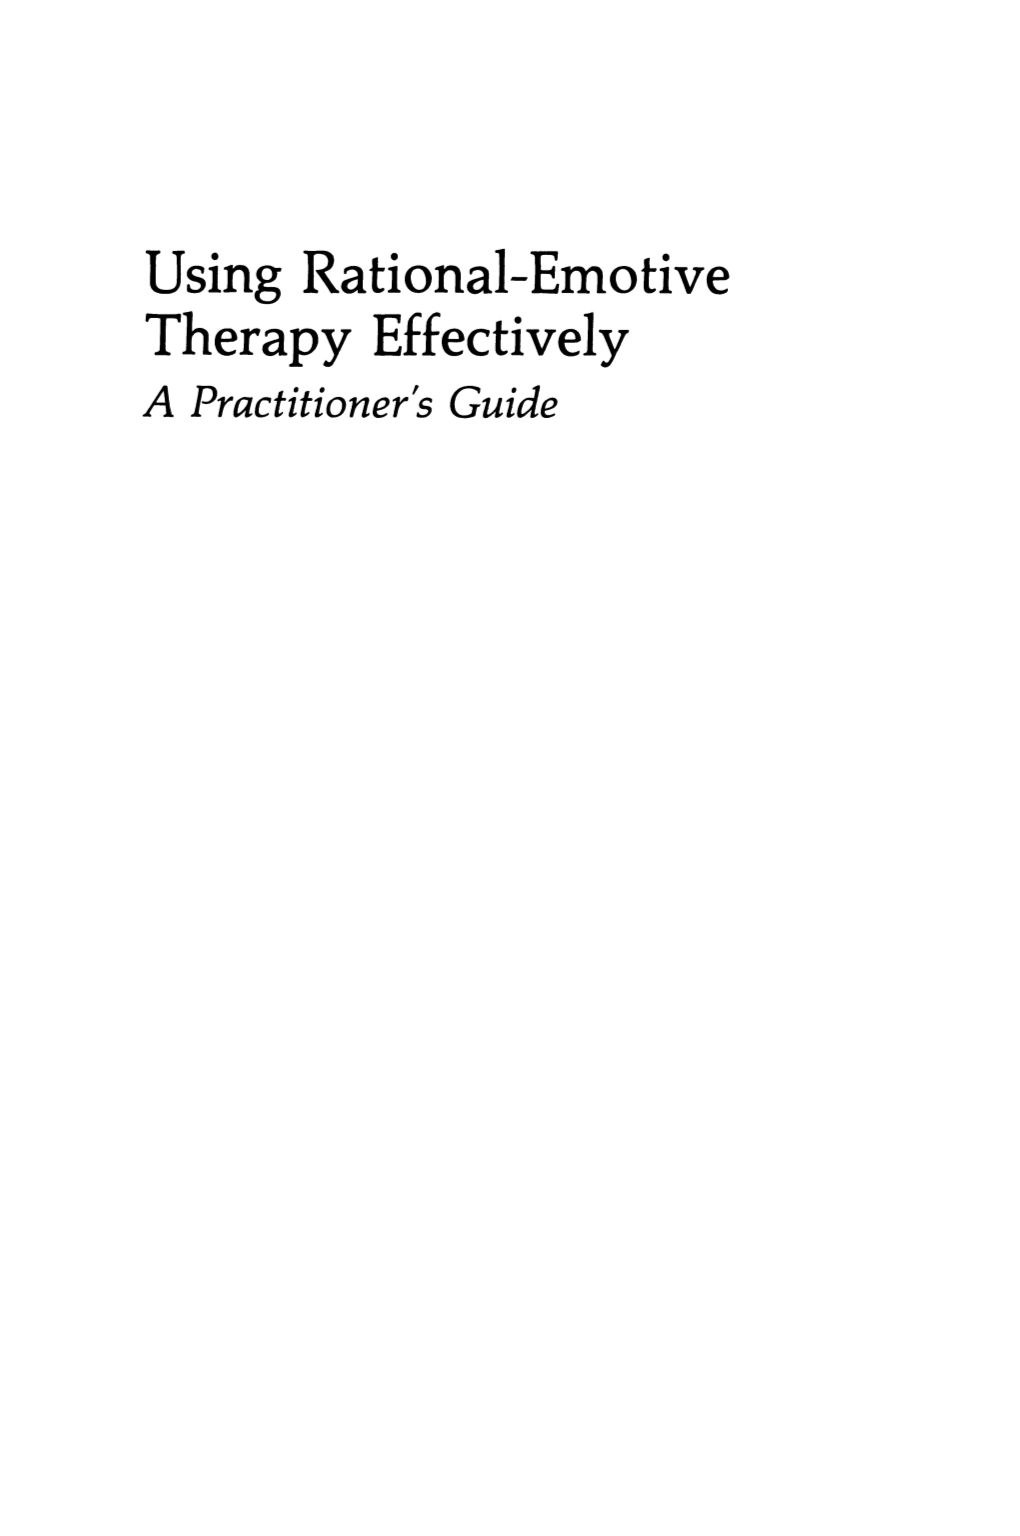 Using Rational-Emotive Therapy Effectively a Practitioner's Guide APPLIED CLINICAL PSYCHOLOGY